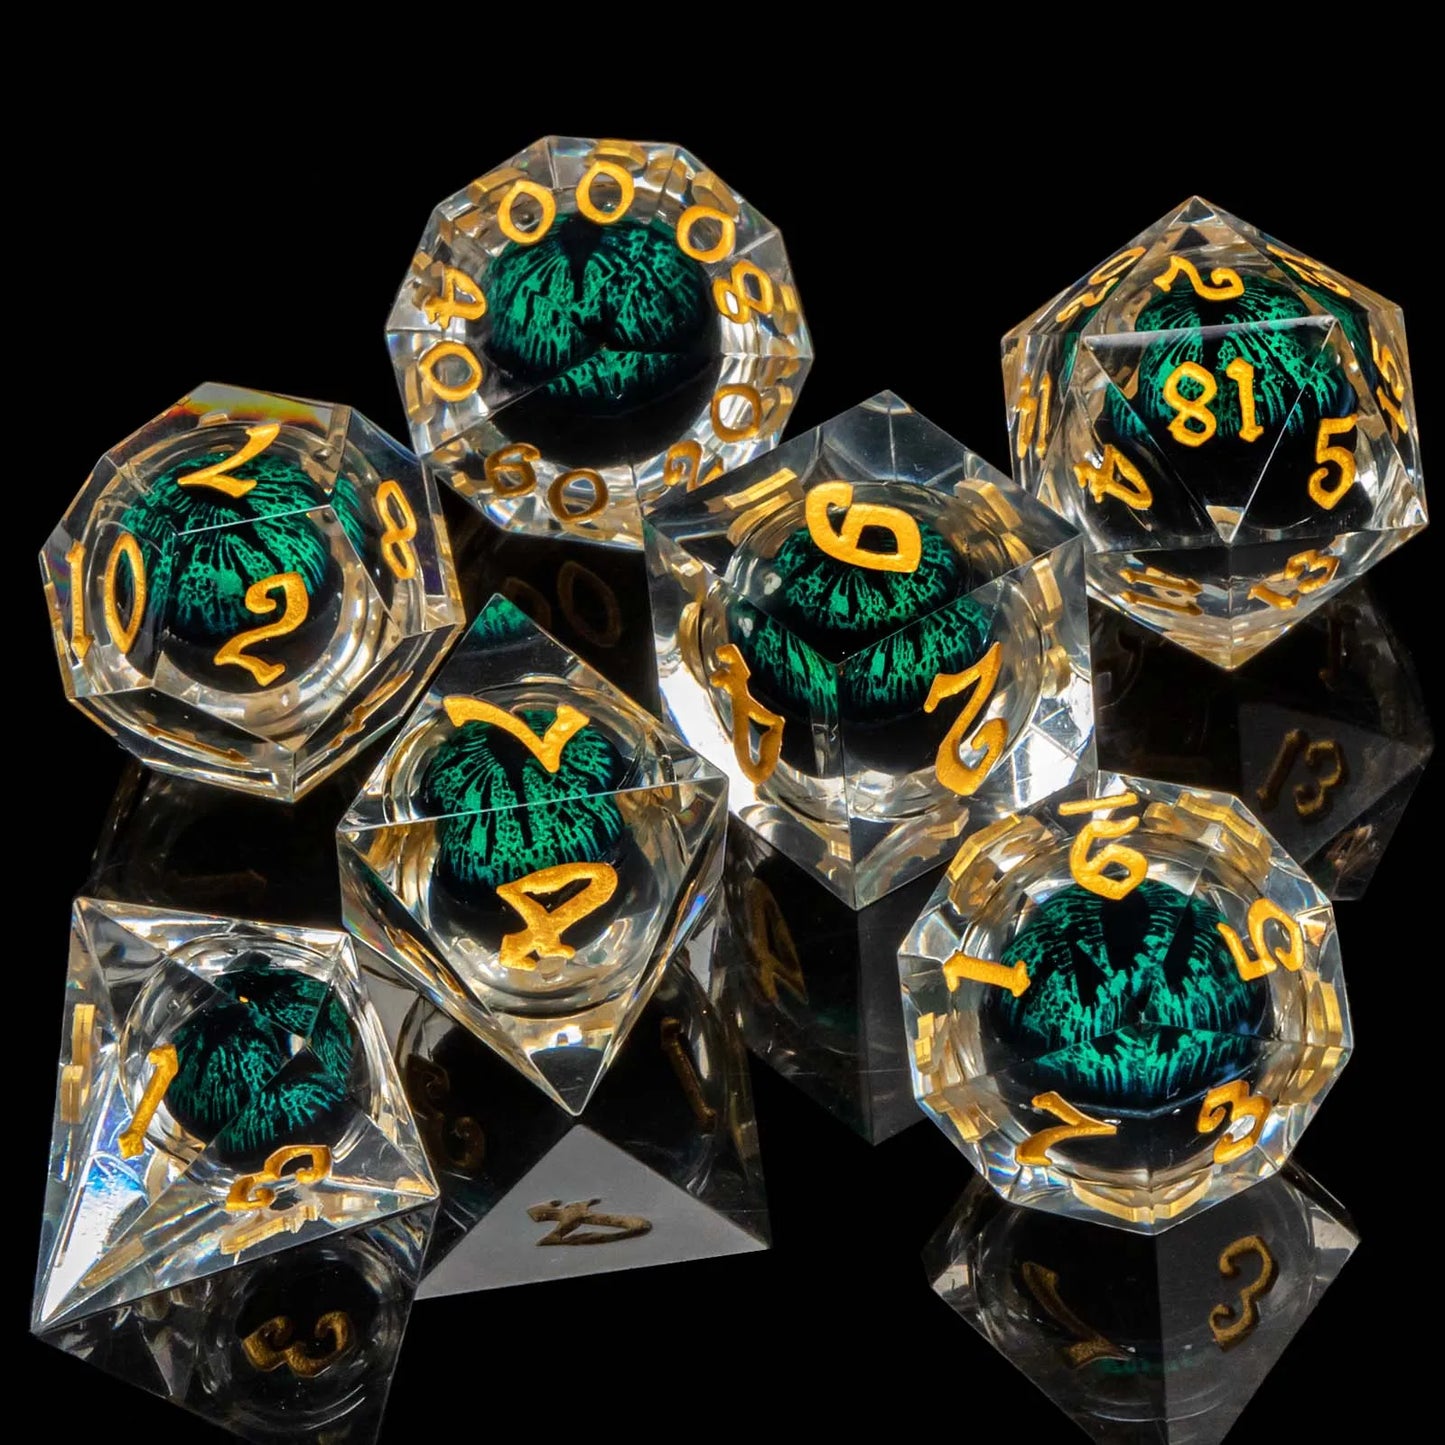 D and D Flowing Sand Sharp Edge Dragon Eye Dnd Resin RPG Polyhedral D&D Dice Set For Dungeon and Dragon Pathfinder Role Playing AZ08